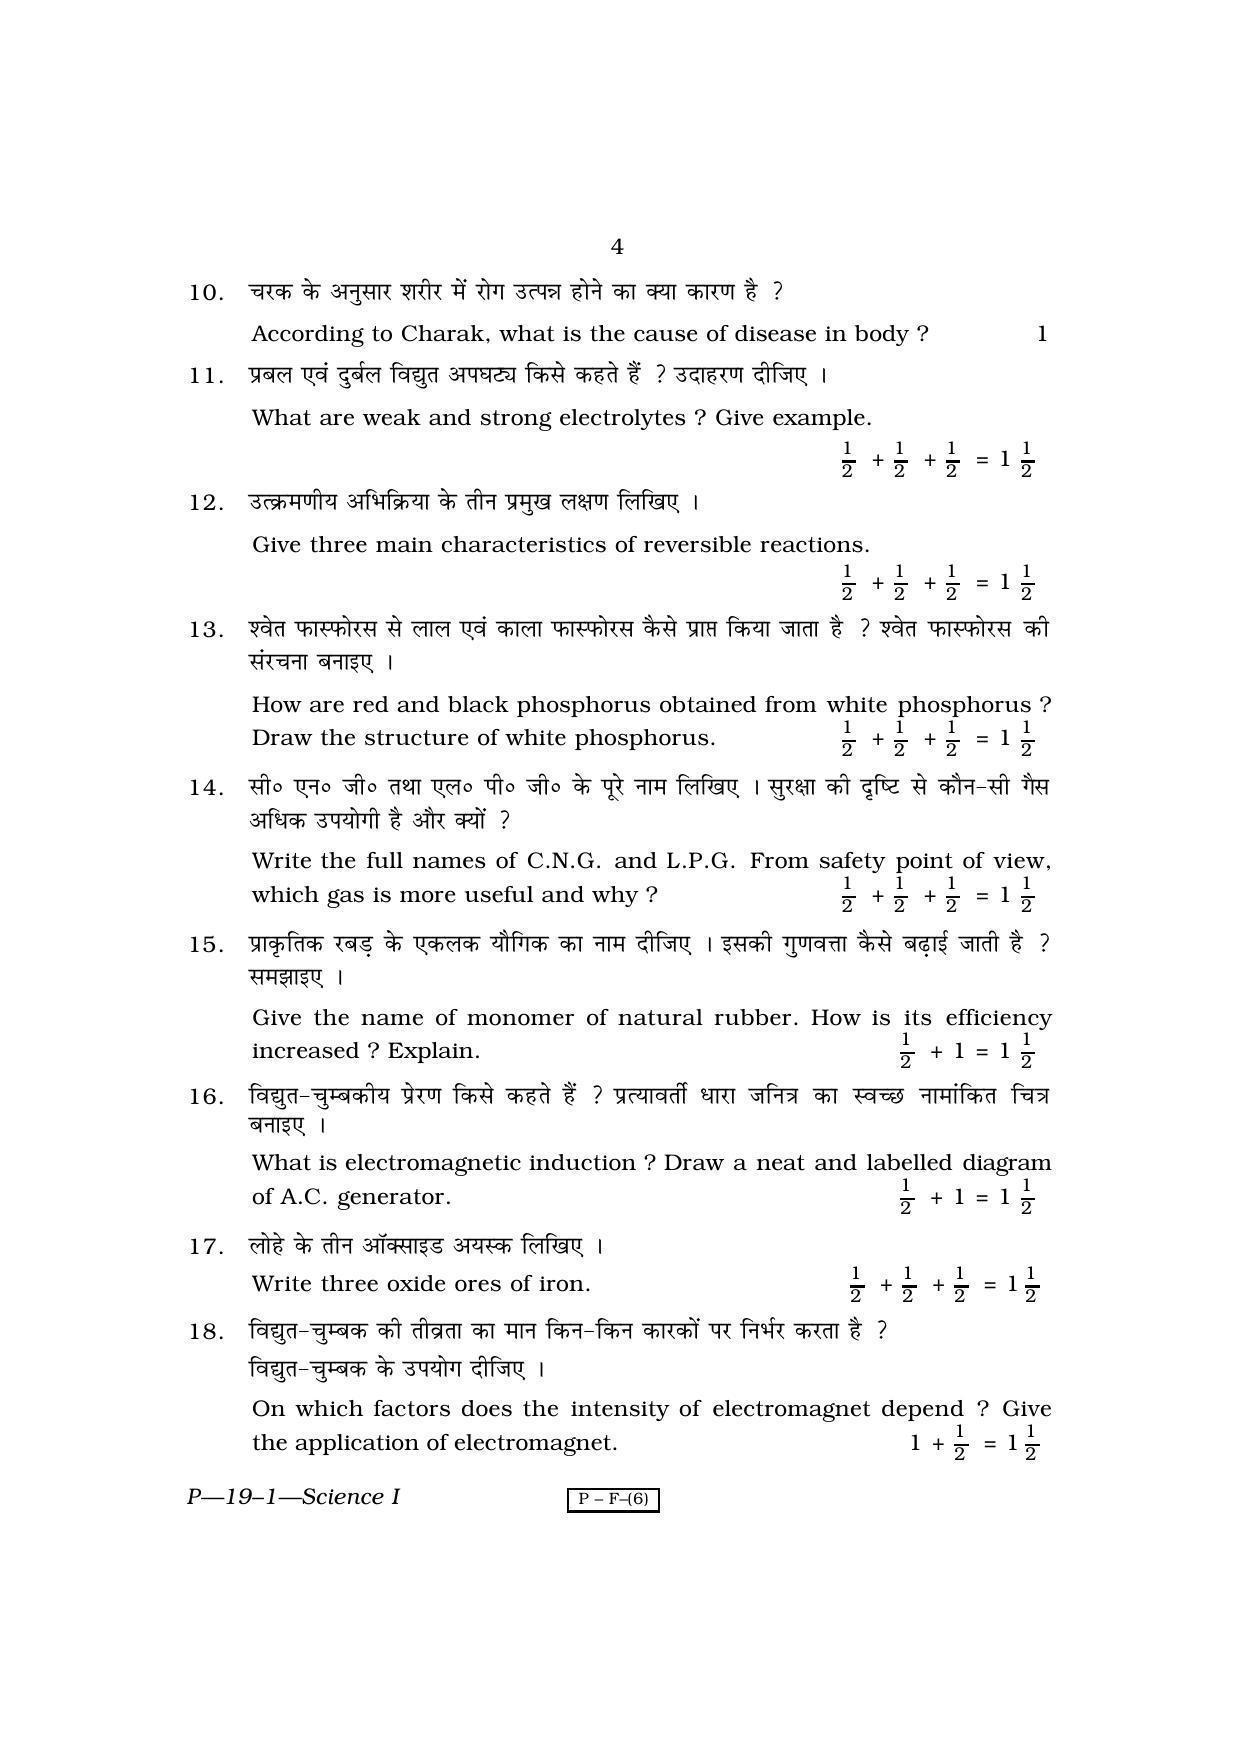 RBSE 2010 Science - I Praveshika Question Paper - Page 4